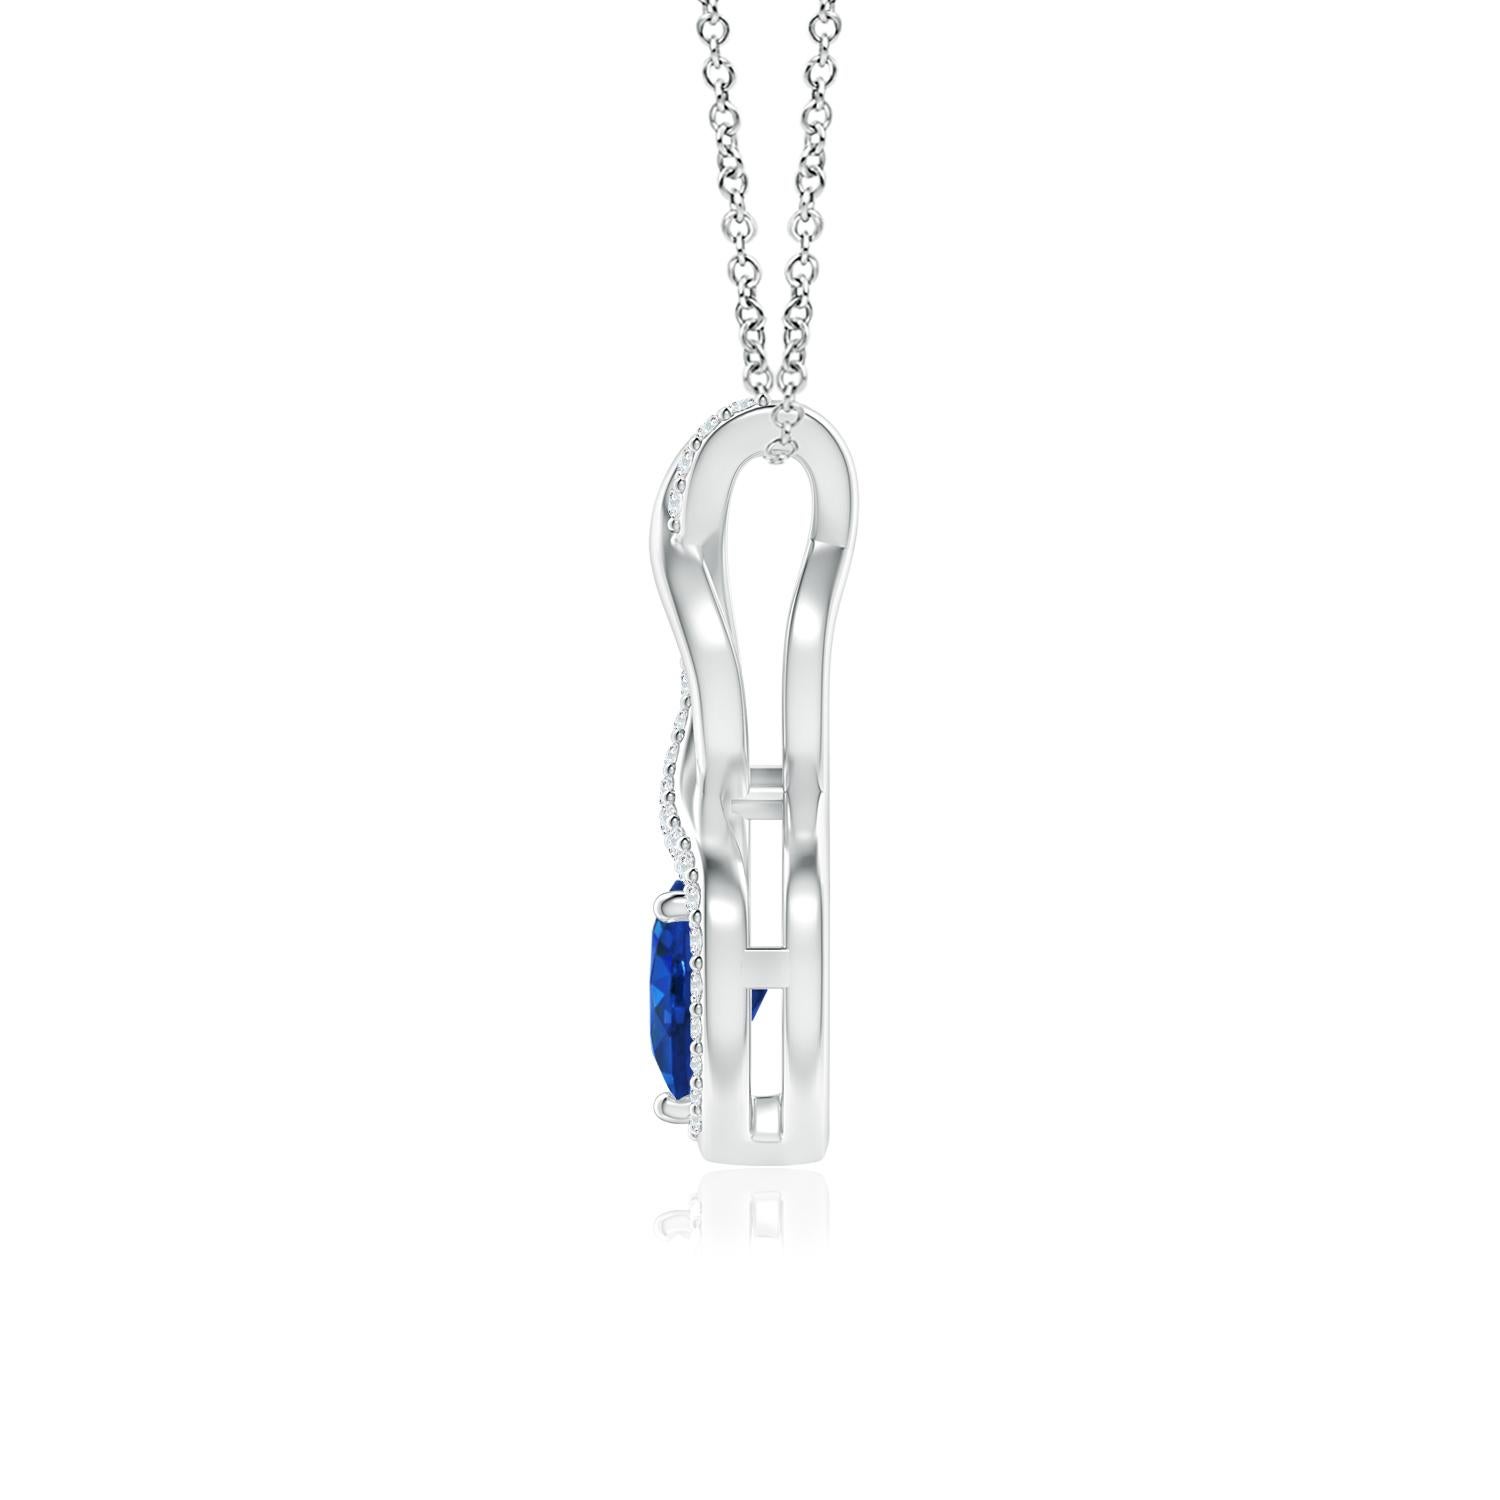 A diamond studded strip entwines with a lustrous metal strip to form an ornate infinity. Floating amid the graceful infinity is a beautiful heart-shaped blue sapphire in a prong setting. The sparkling diamonds infuse a captivating edge to this